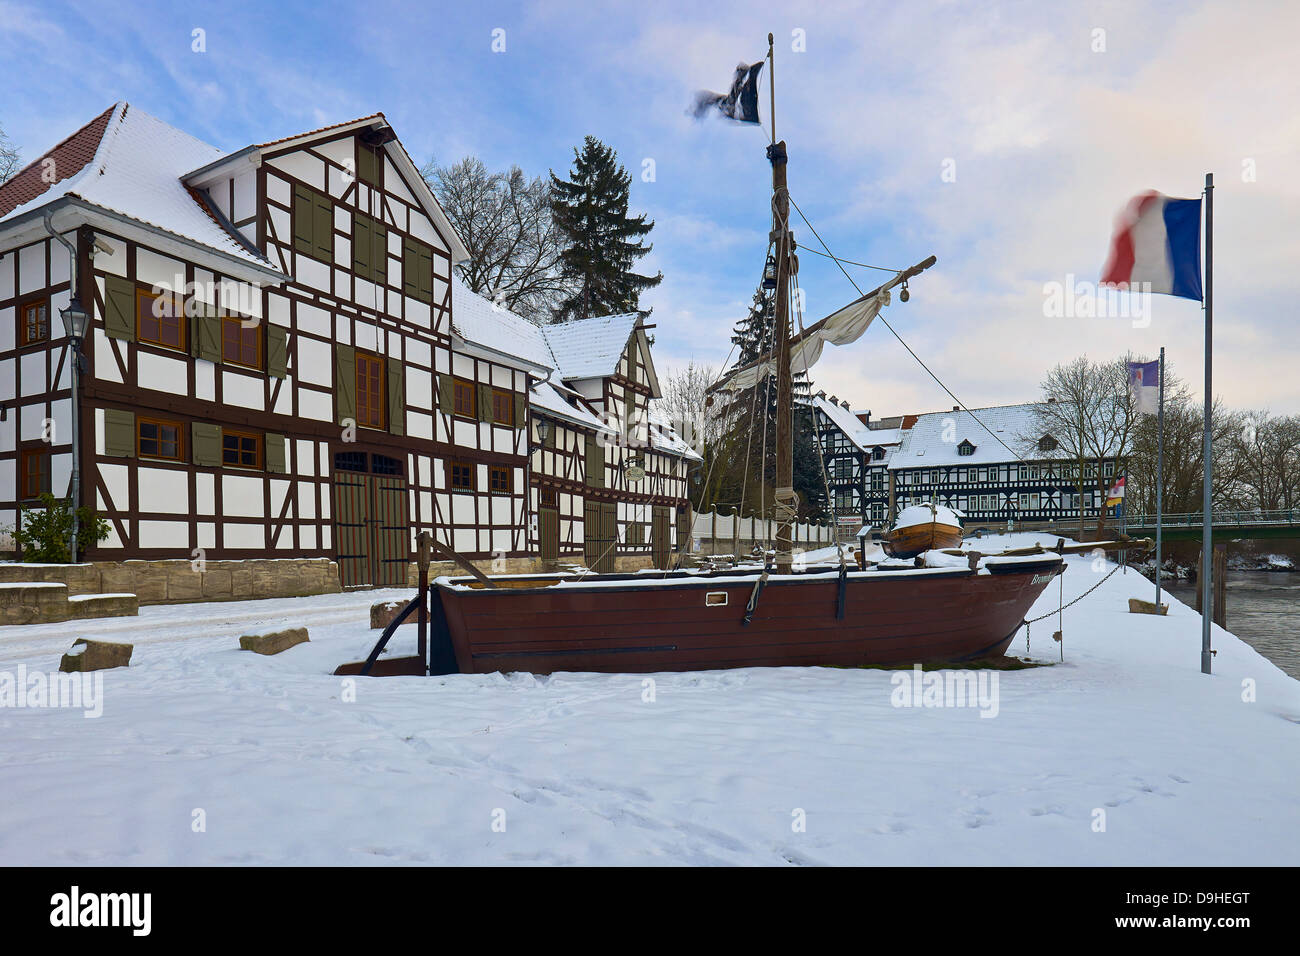 Old harbor at the Schlagd of Wanfried, Werra Meissner District, Hesse, Germany Stock Photo